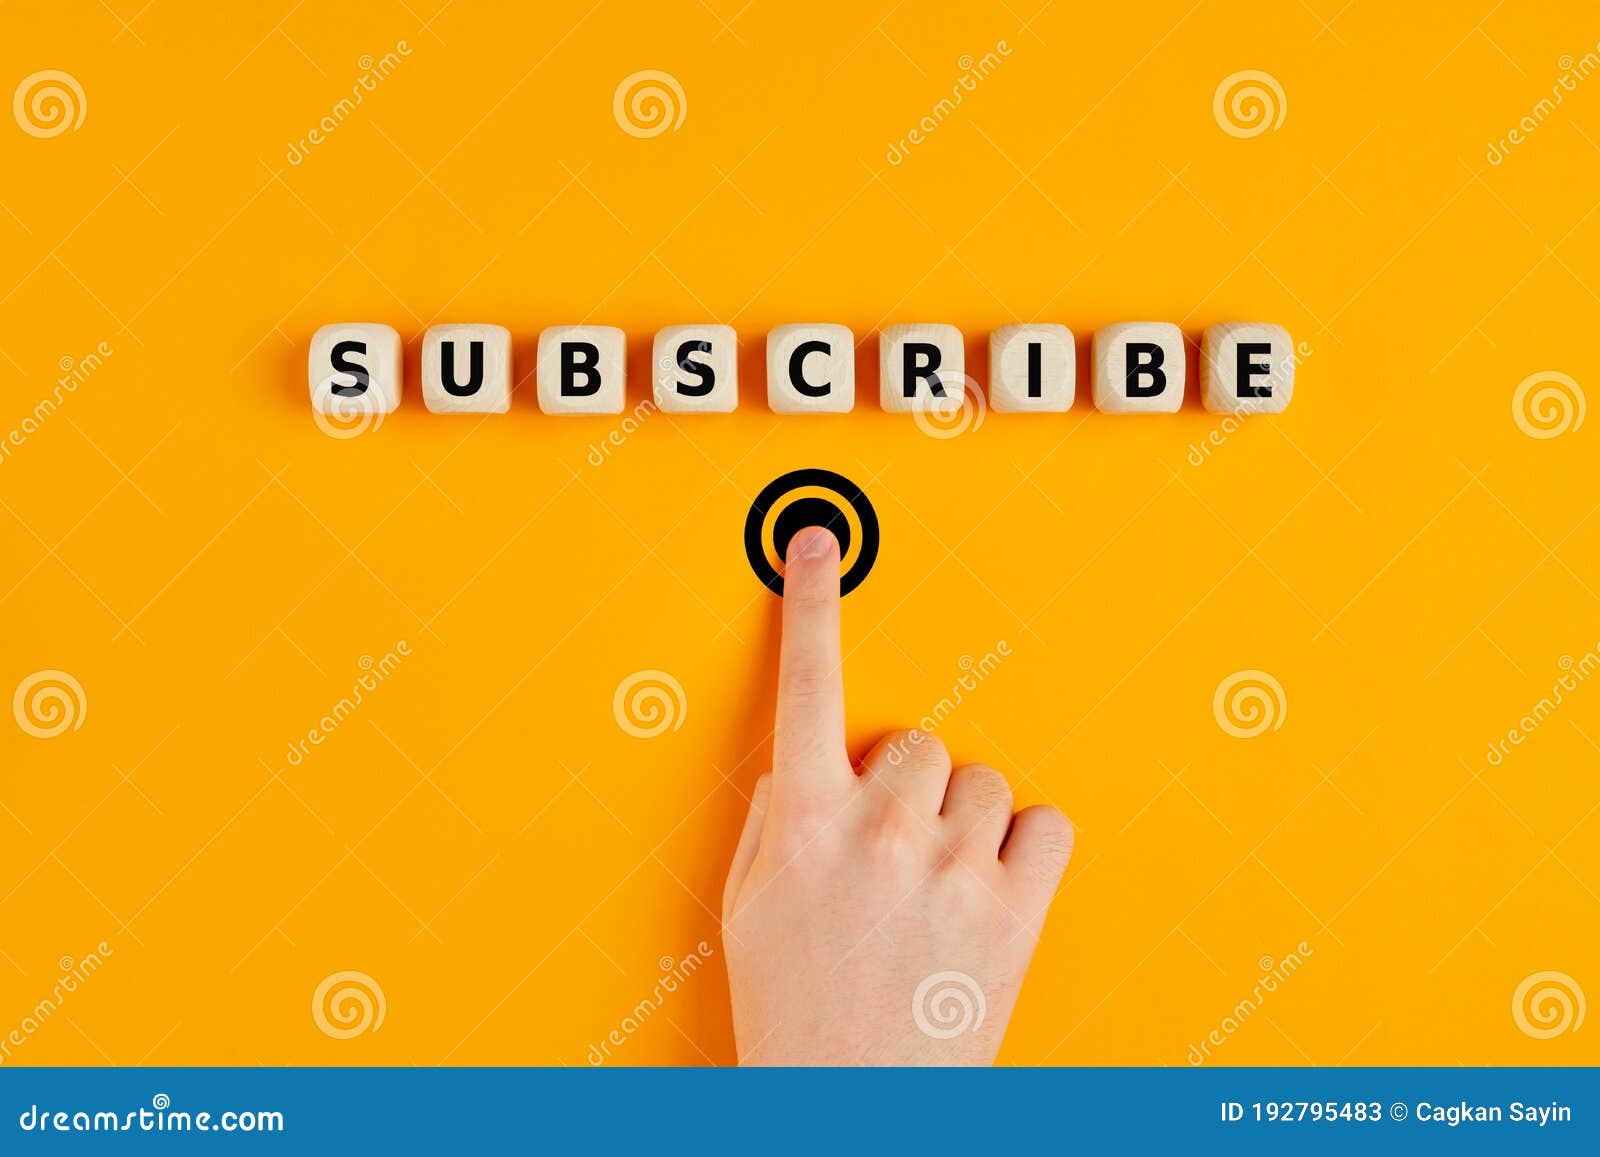 male hand pressing subscription button with the word subscribe written on wooden blocks. concept of online registration